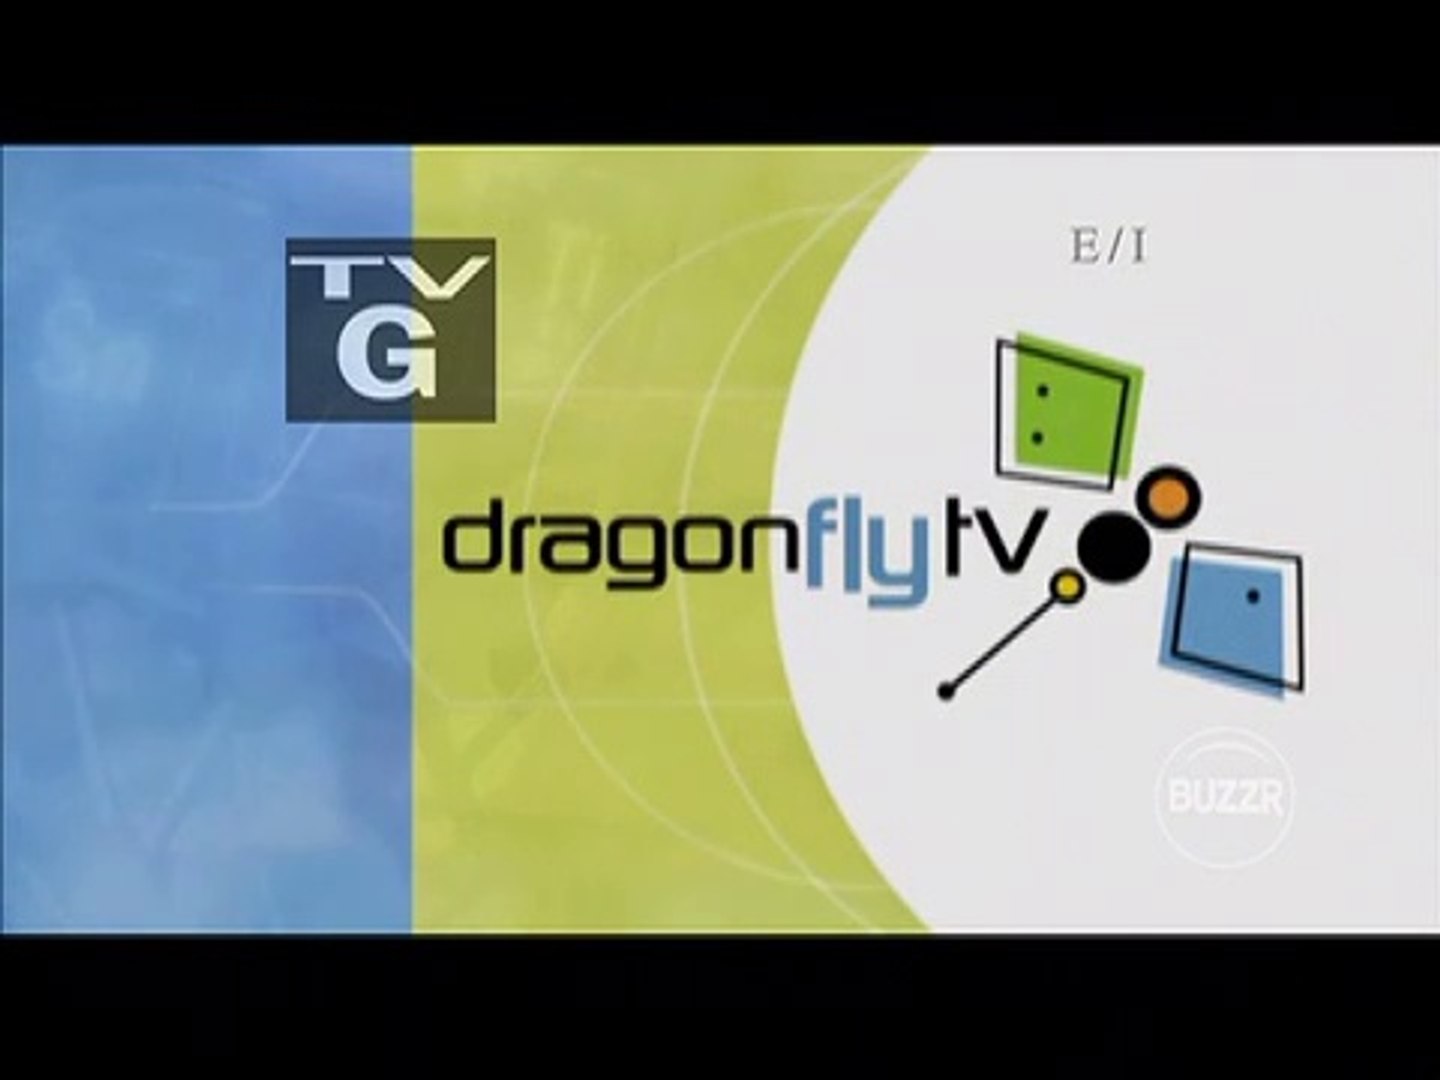 Dragonfly TV (March 27, 2004): Games